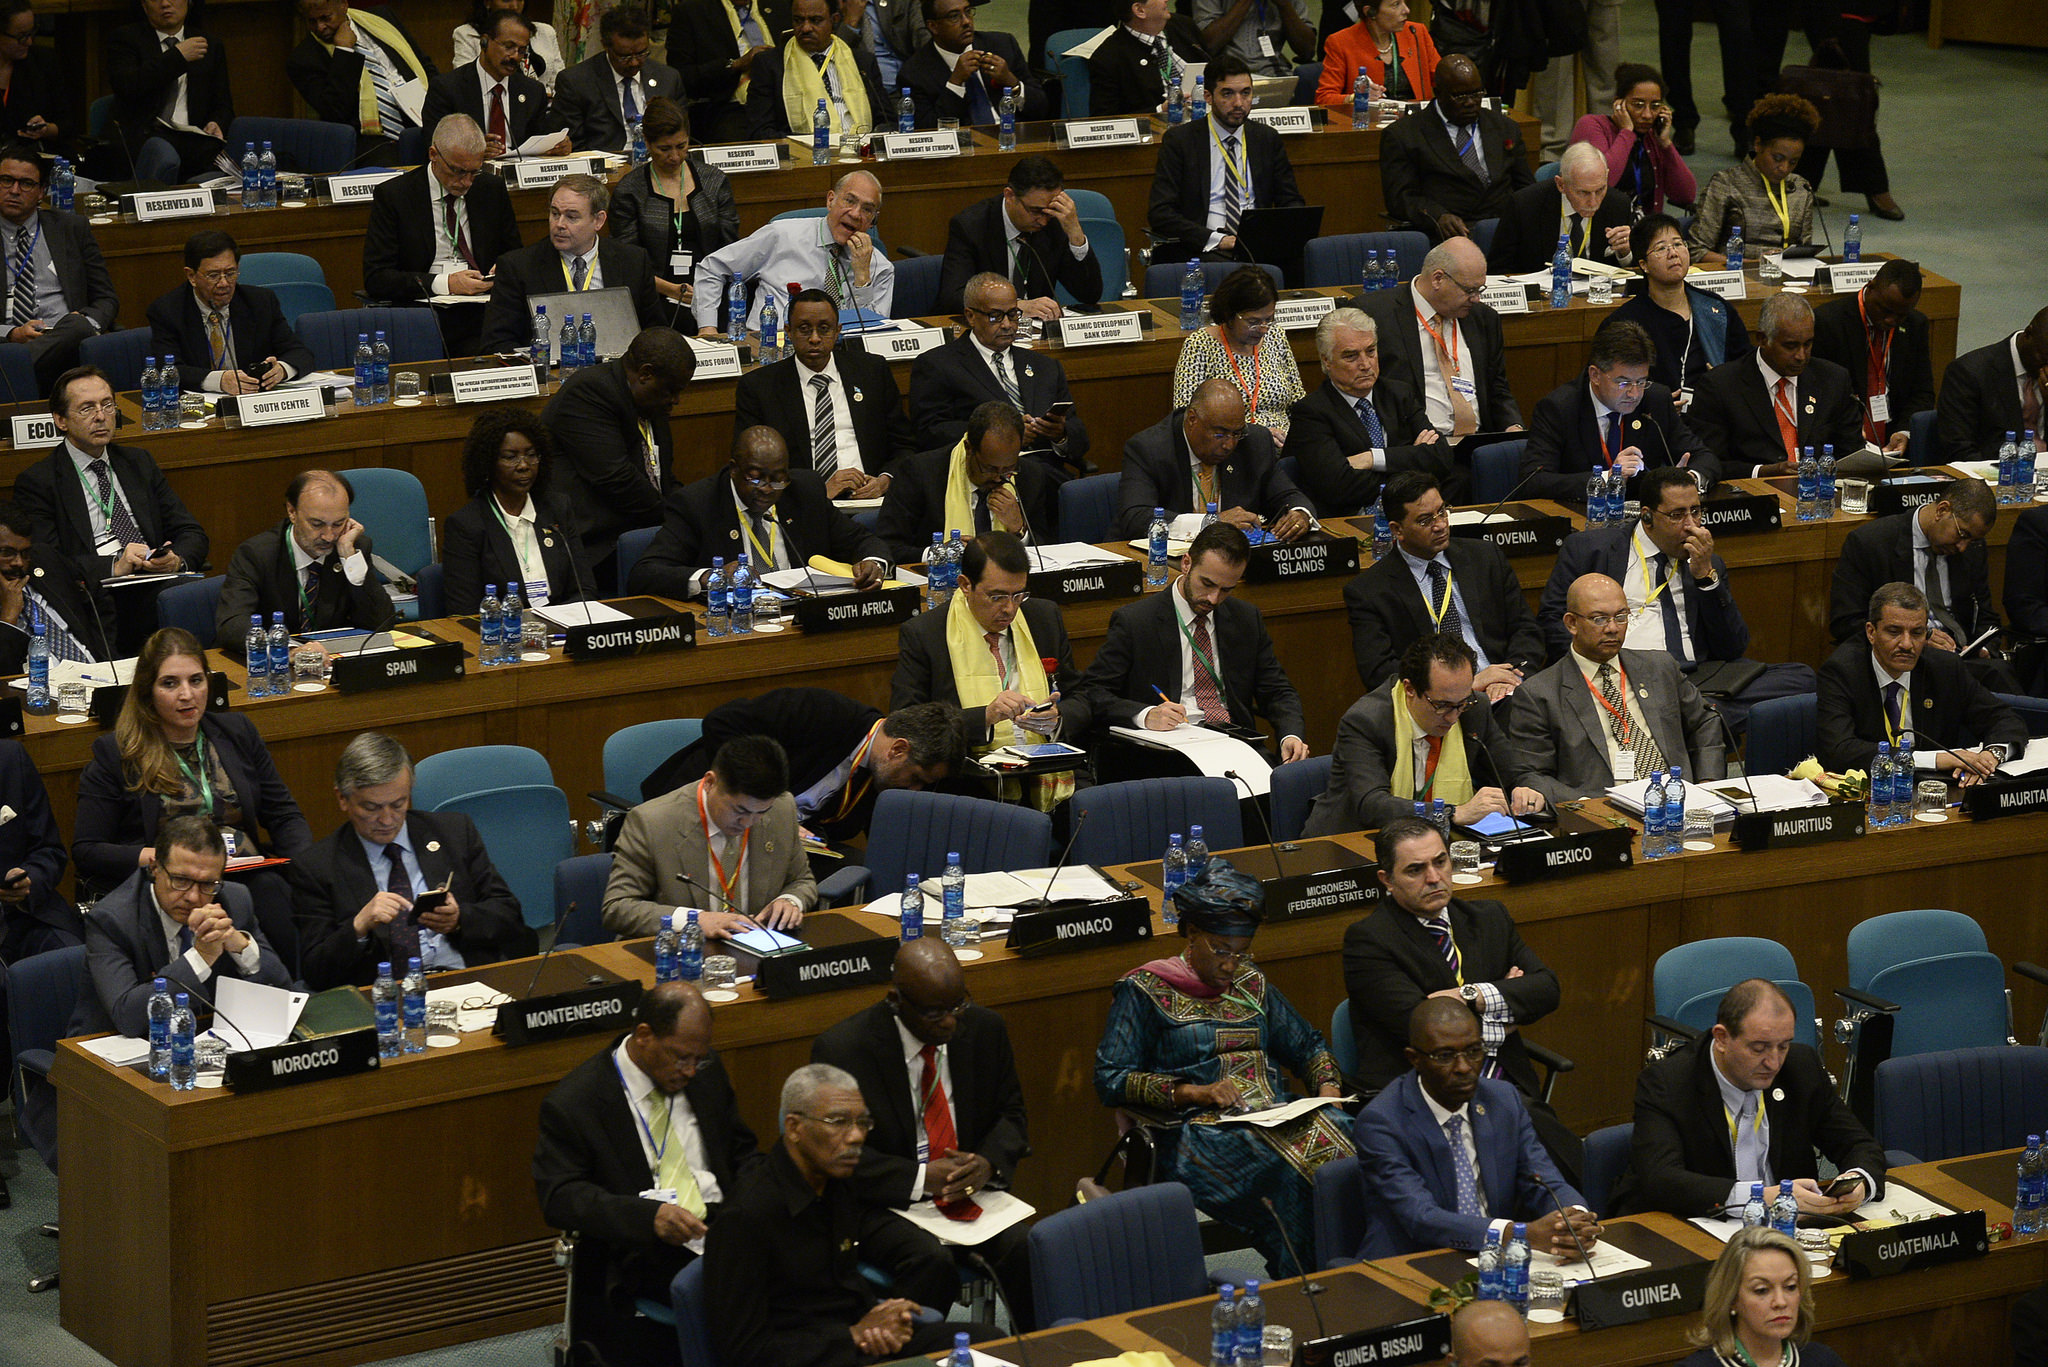 Rows of people in suits, many looking at blackberries or laptops, in the UN Conference Centre